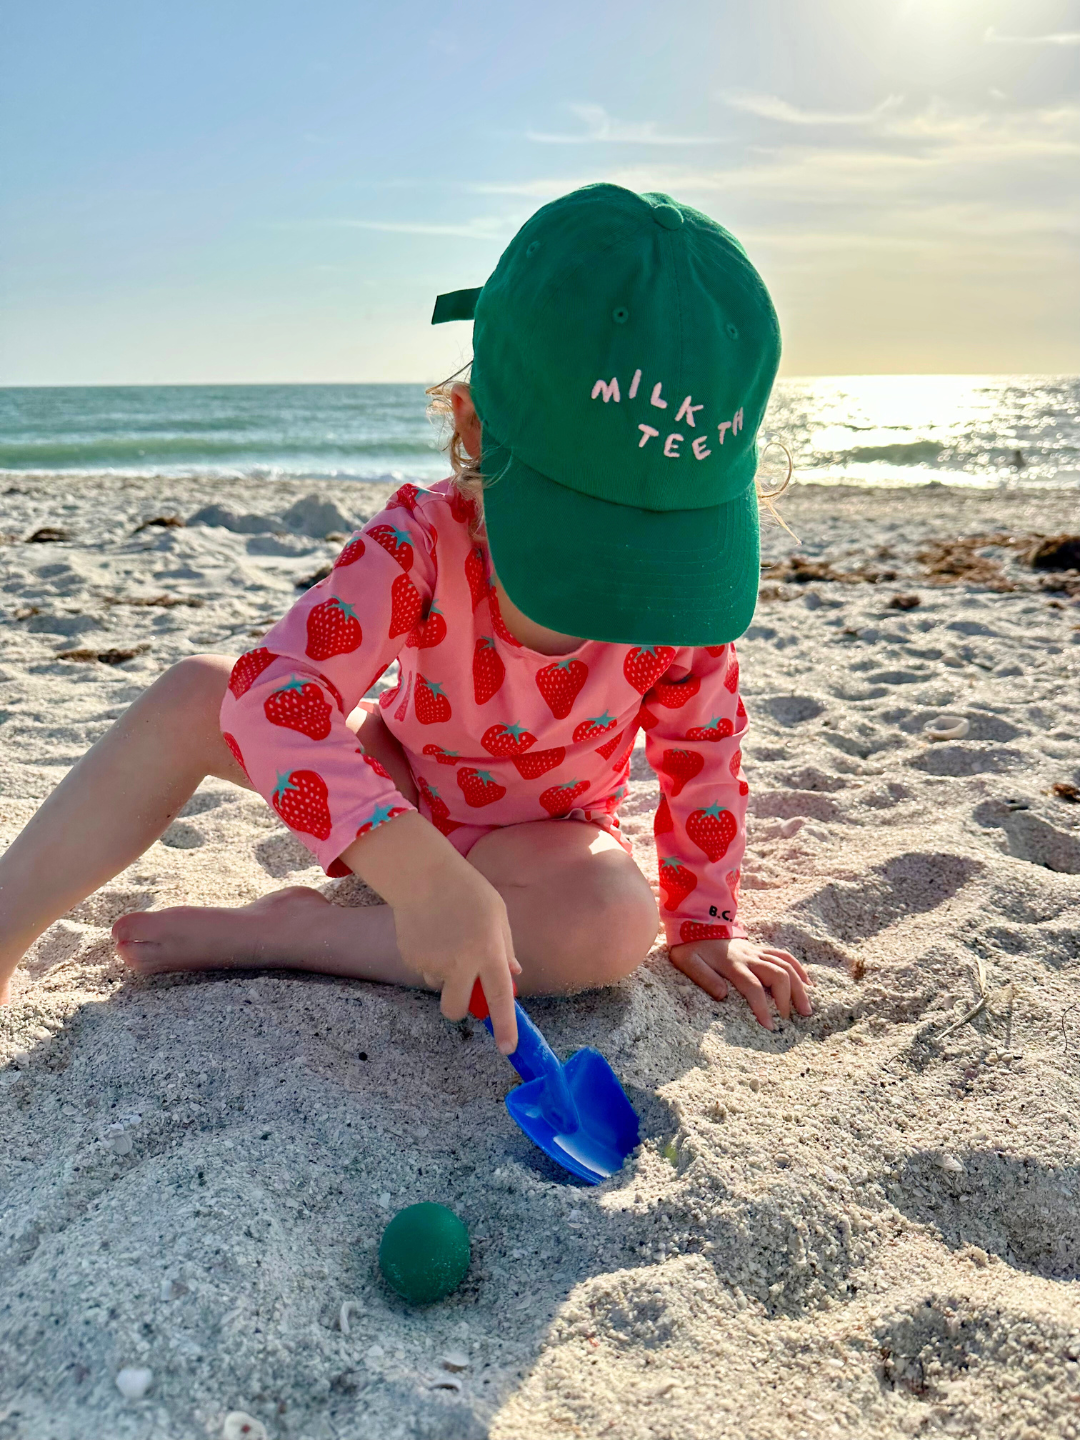 Toddler wearing the Milk Teeth baseball cap in kelly green with pink Milk Teeth embroidery, at the beach in a pink swimsuit with red strawberries.